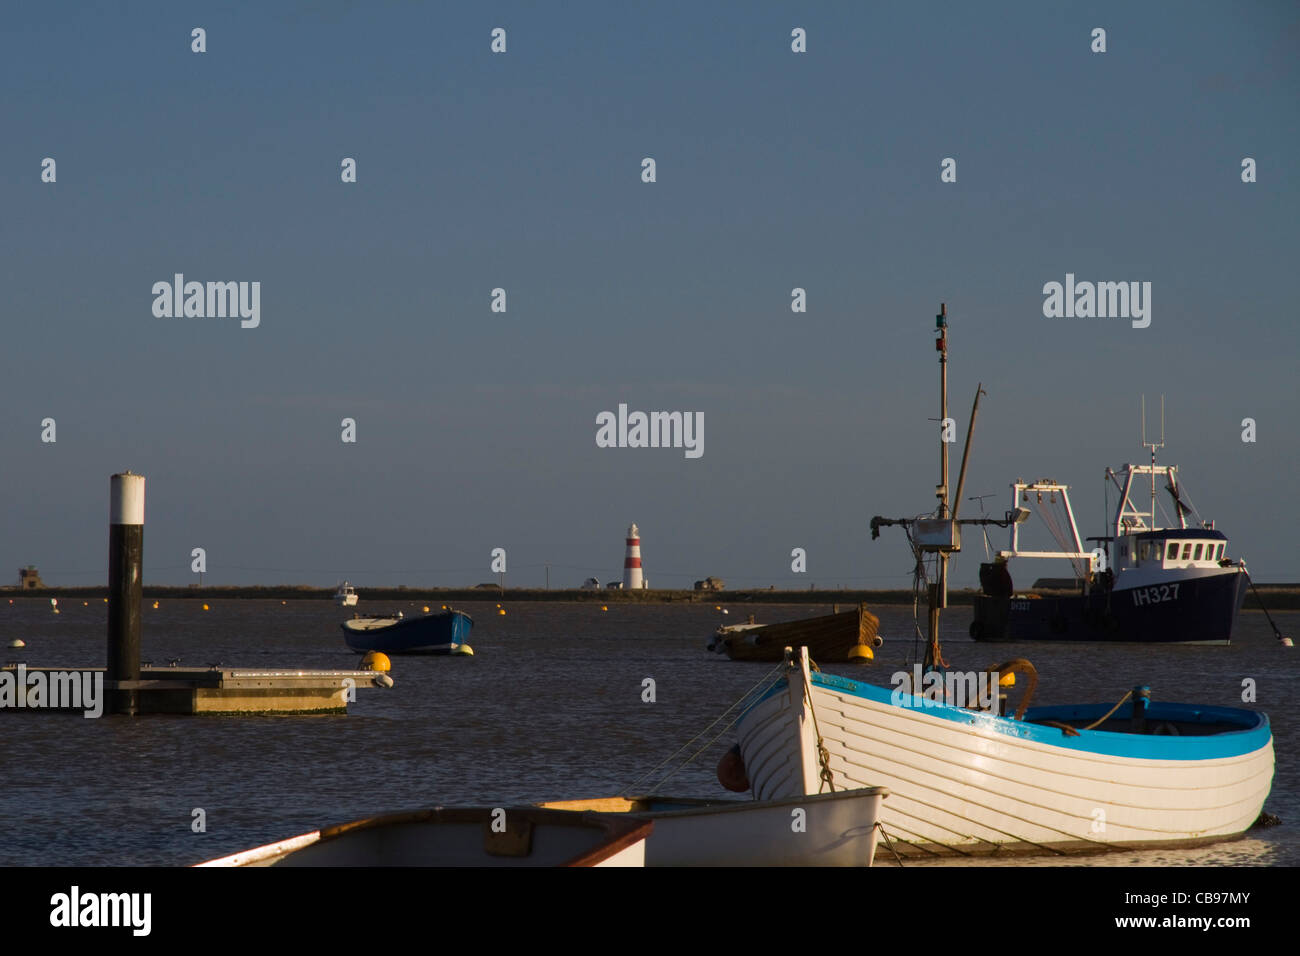 Boats moored at Orford Quay in Suffolk, England, with Orford Ness lighthouse in the far distance Stock Photo